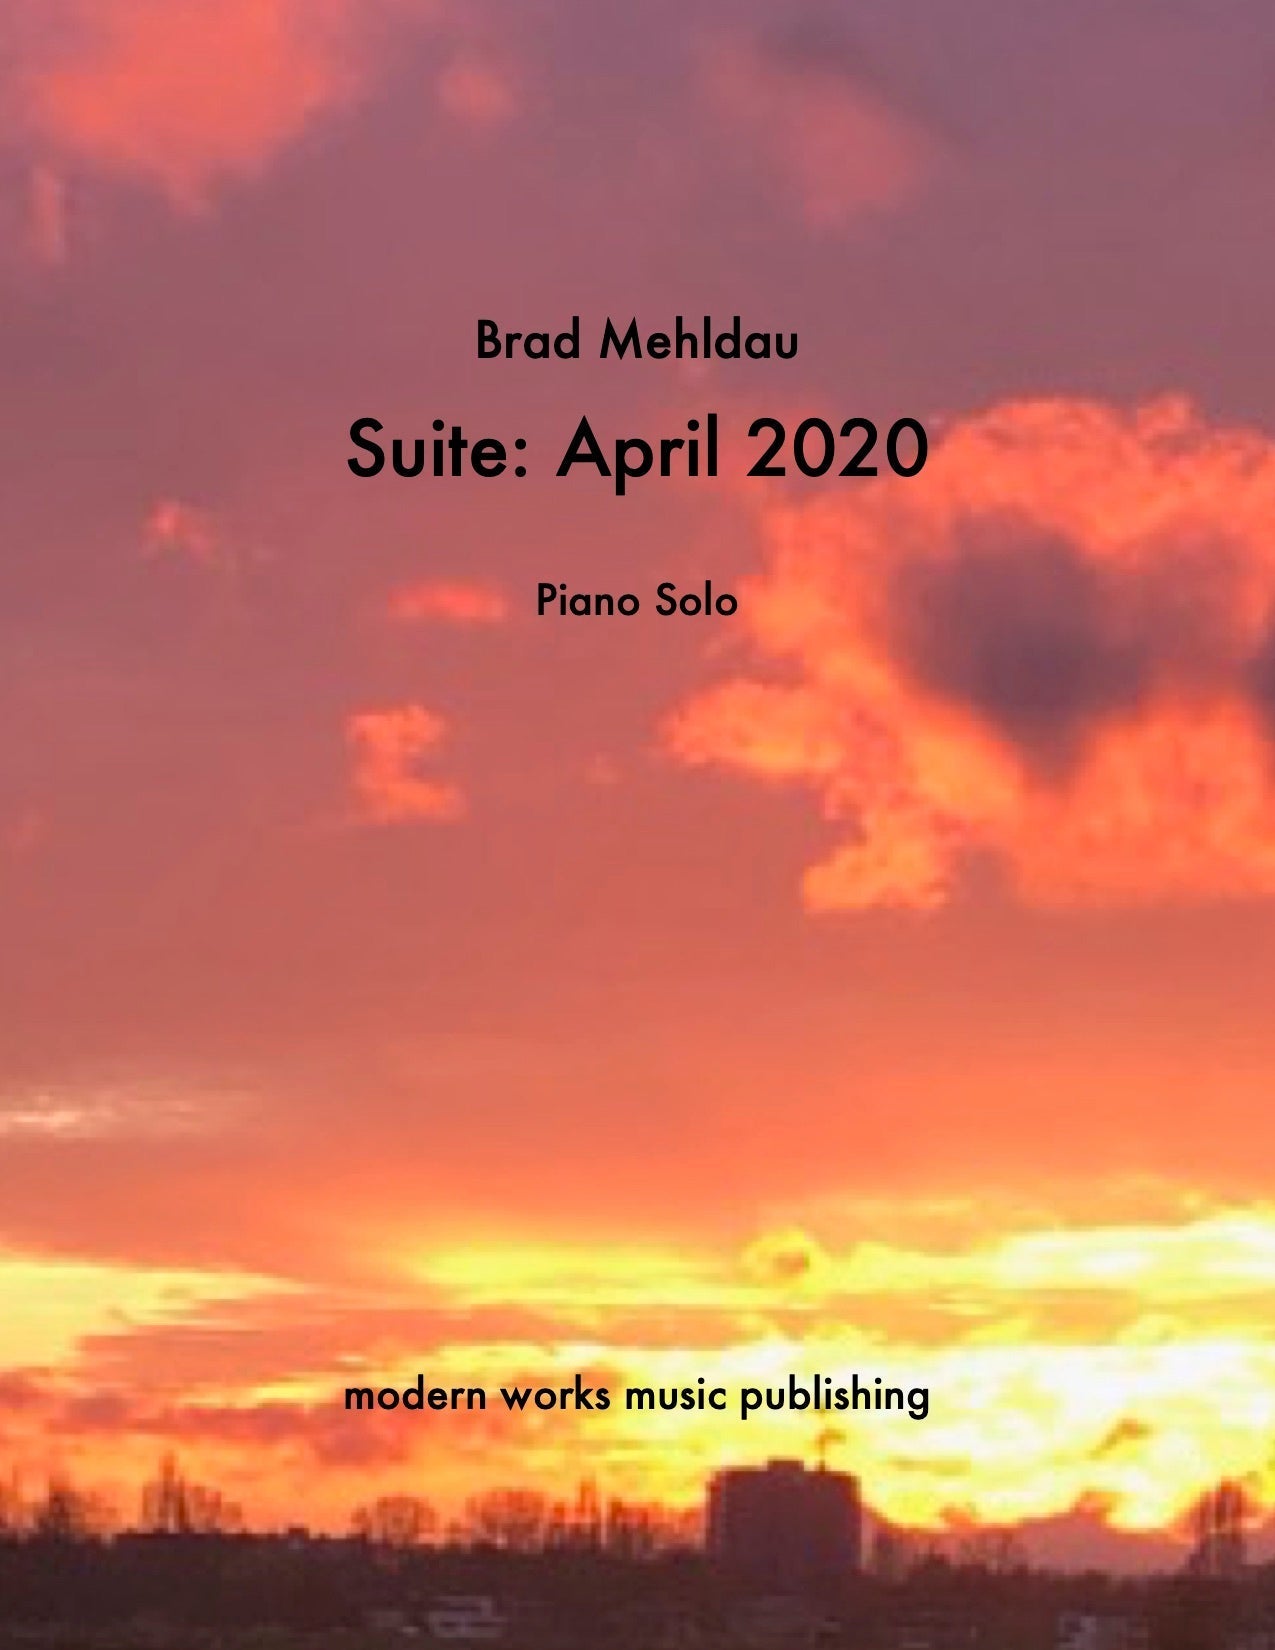 Lullaby from Suite: April 2020